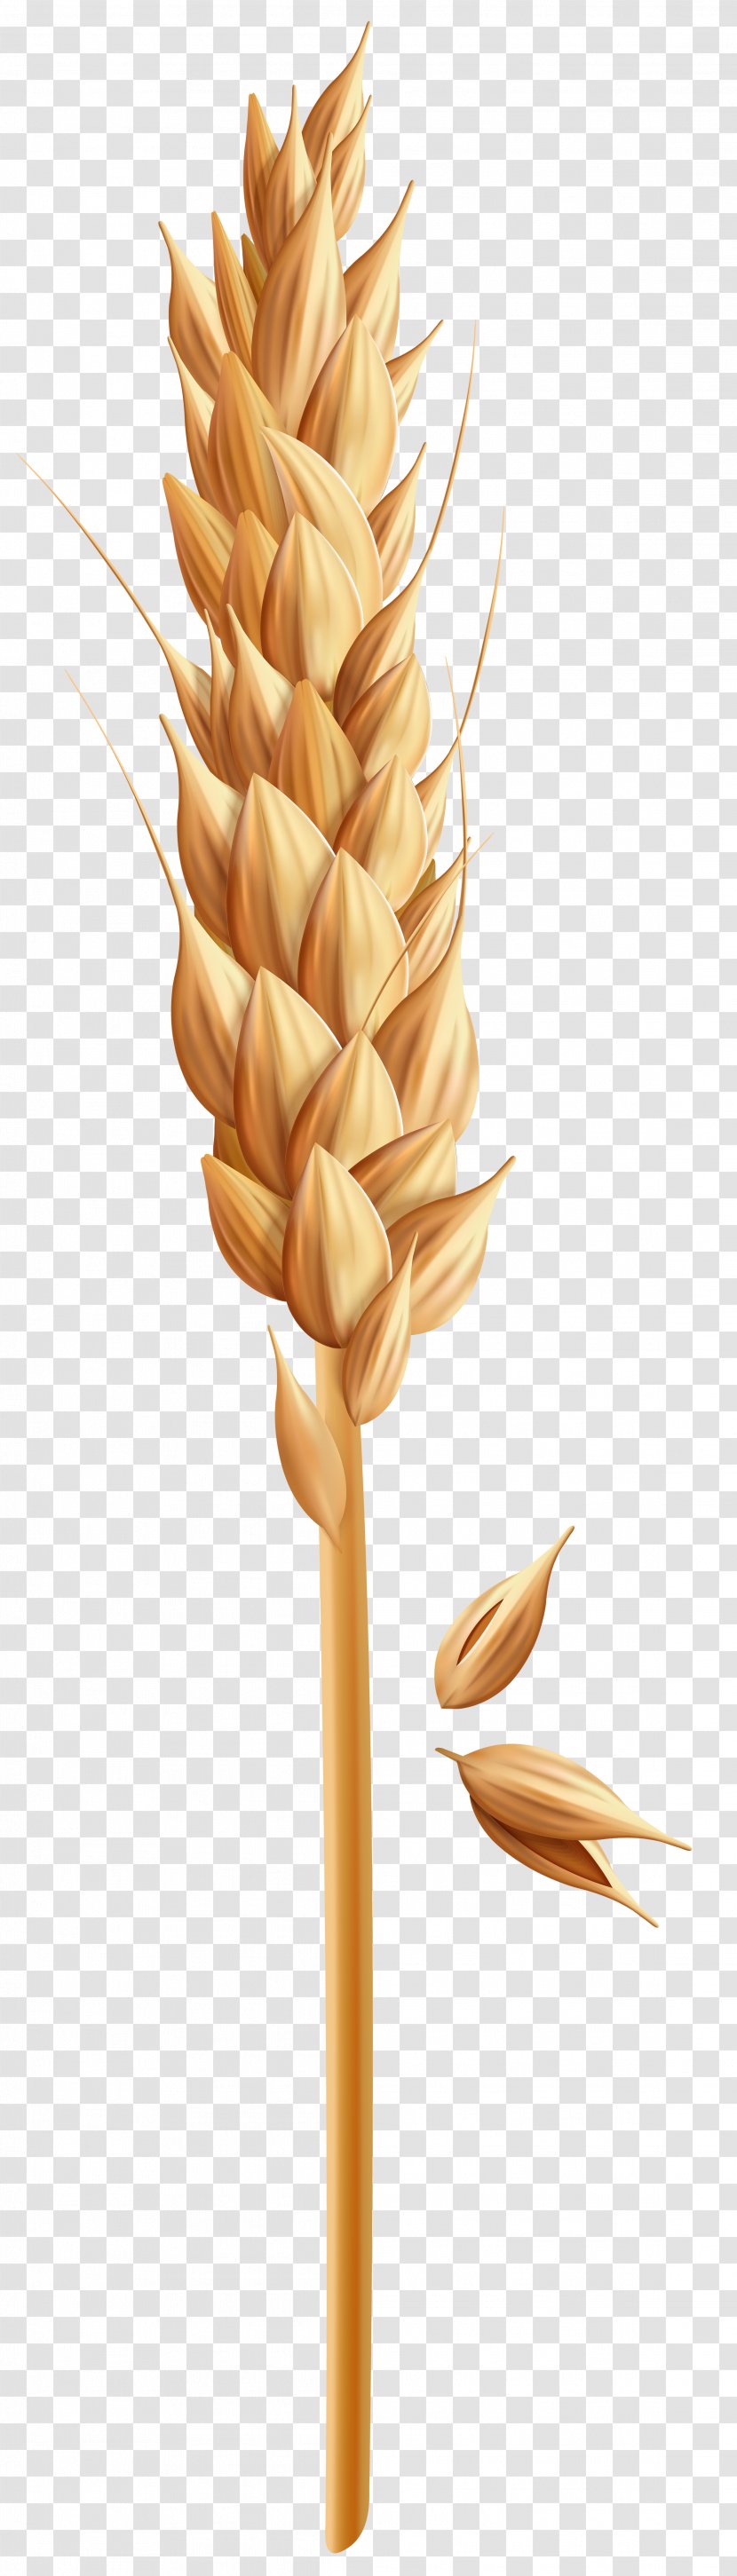 Clip Art Cereal Image Wheat - Grass Family Transparent PNG